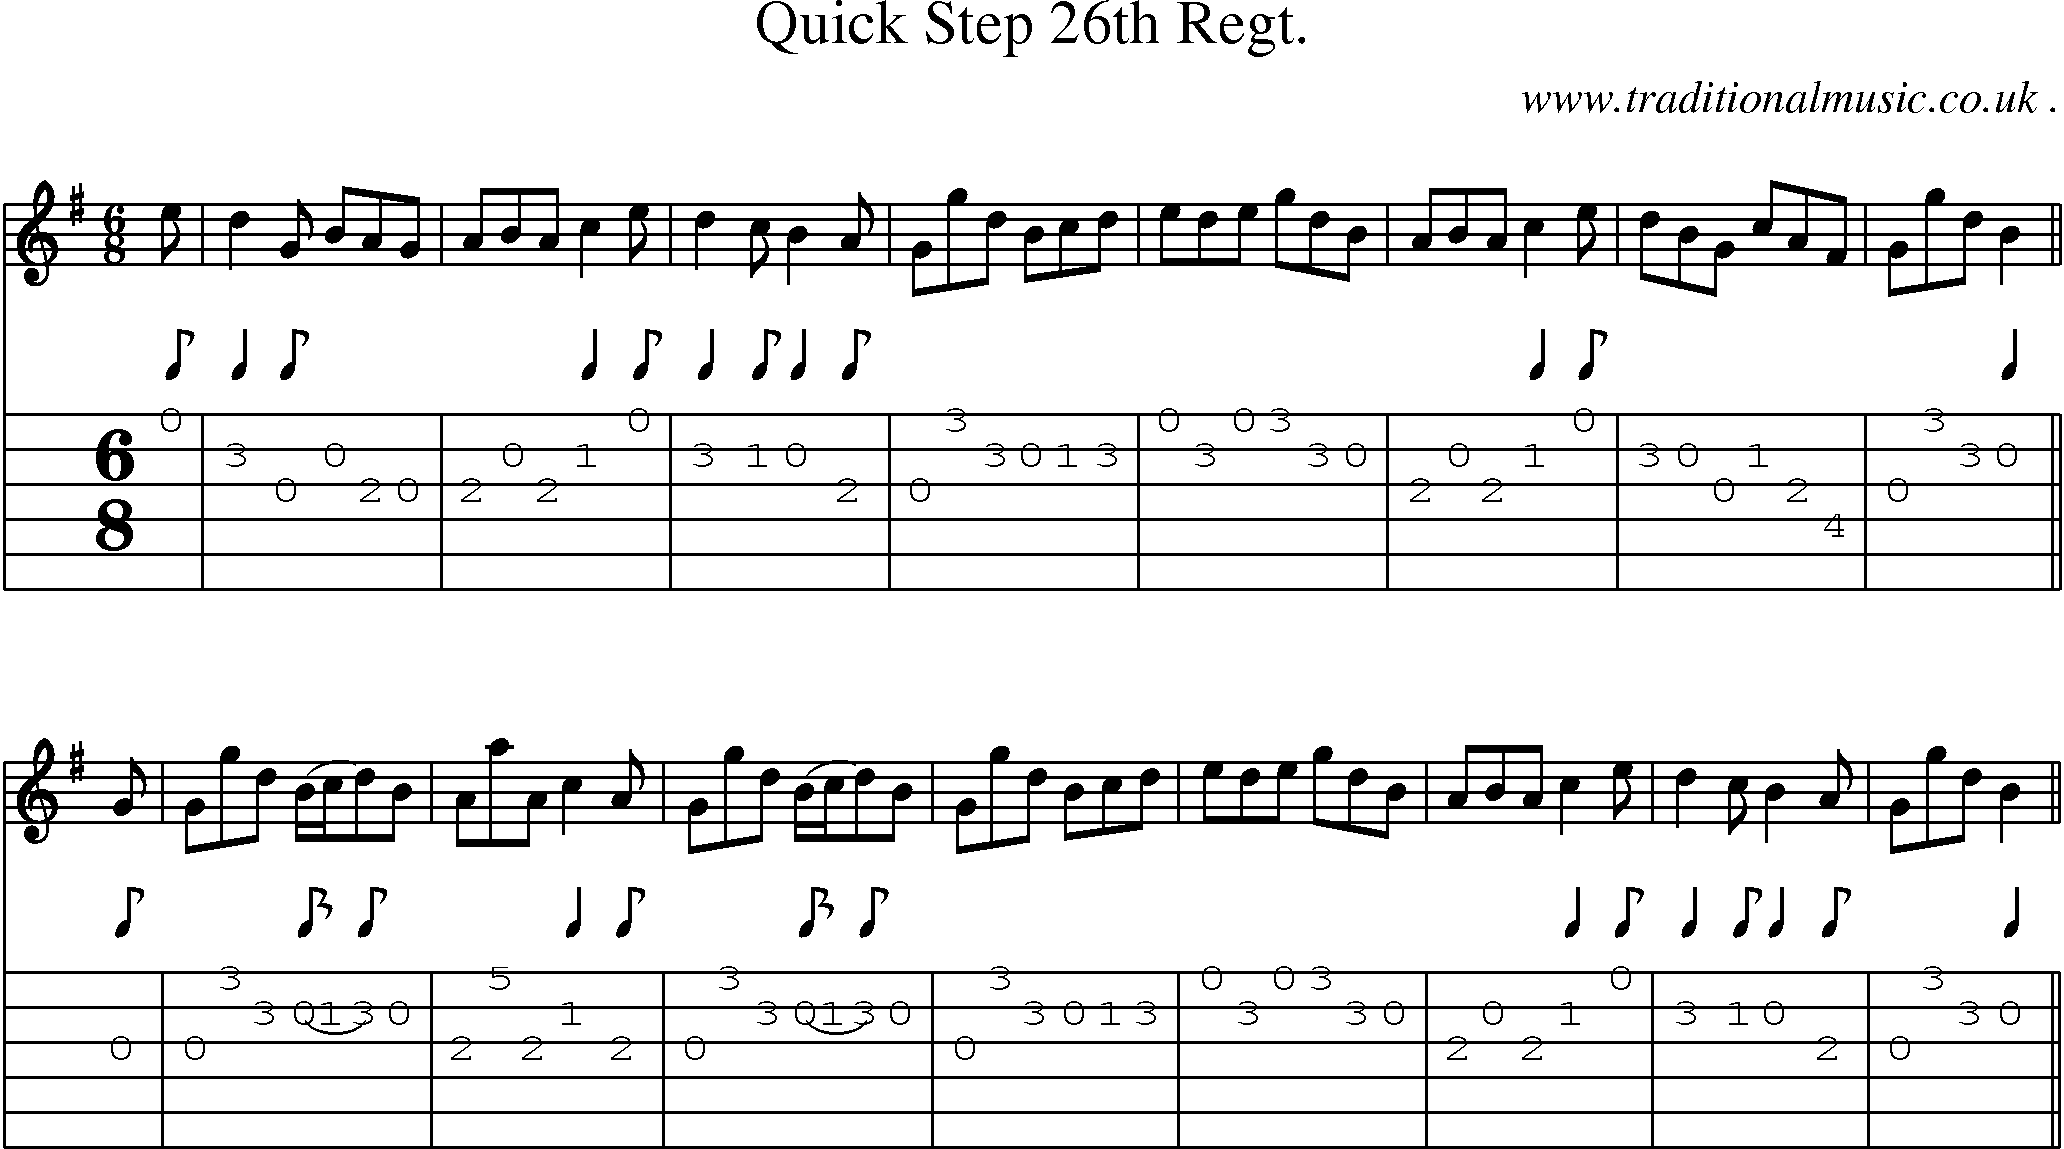 Sheet-Music and Guitar Tabs for Quick Step 26th Regt